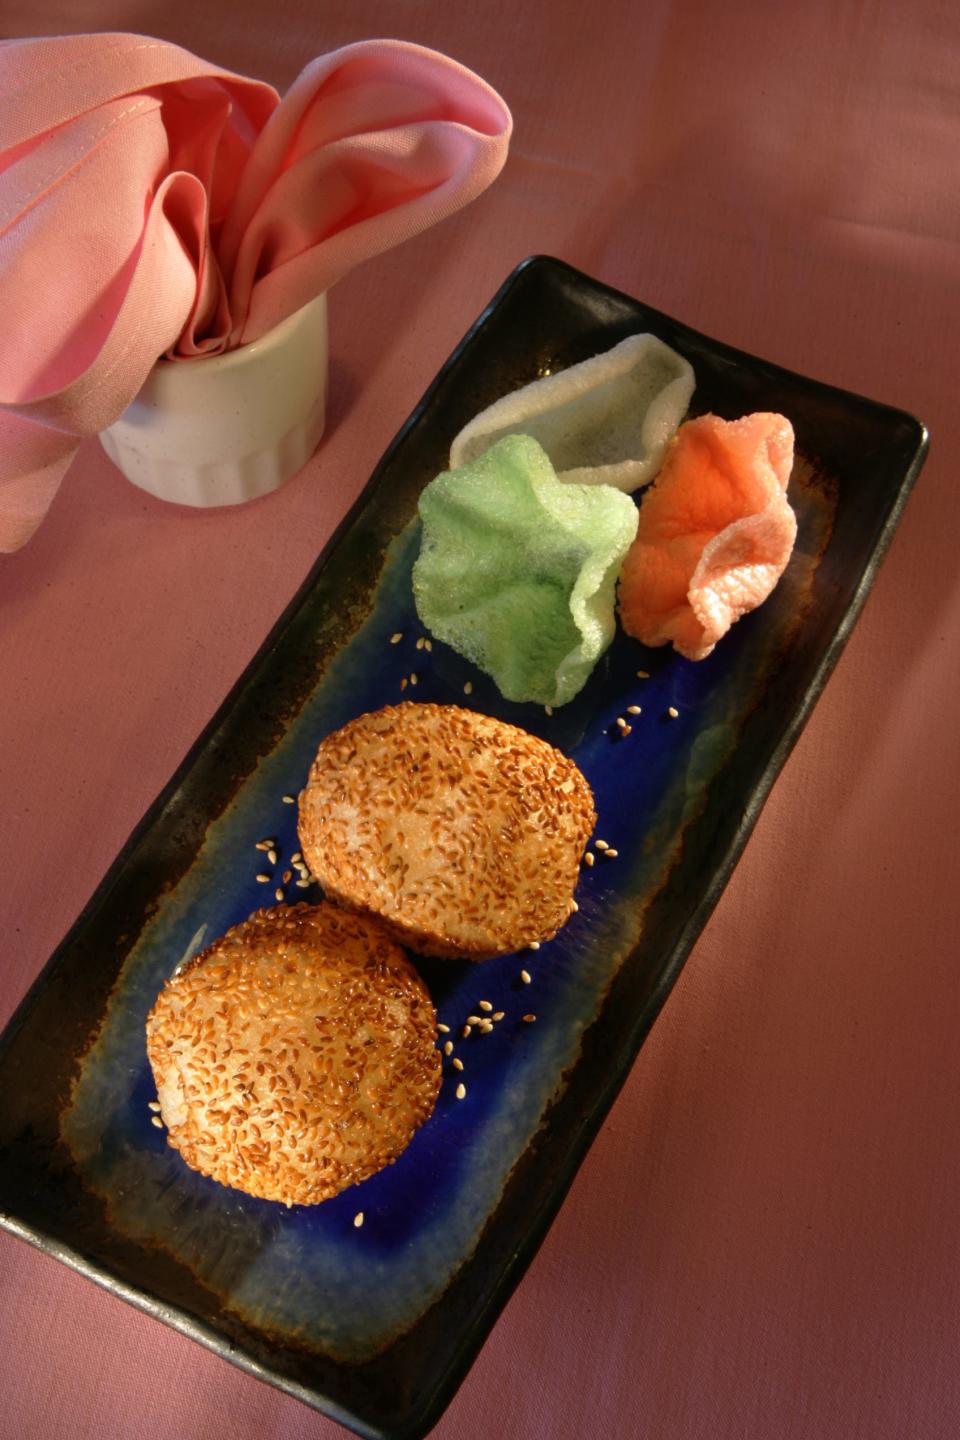 Sweet sesame balls are among the dim sum choices at Silver Crystal.